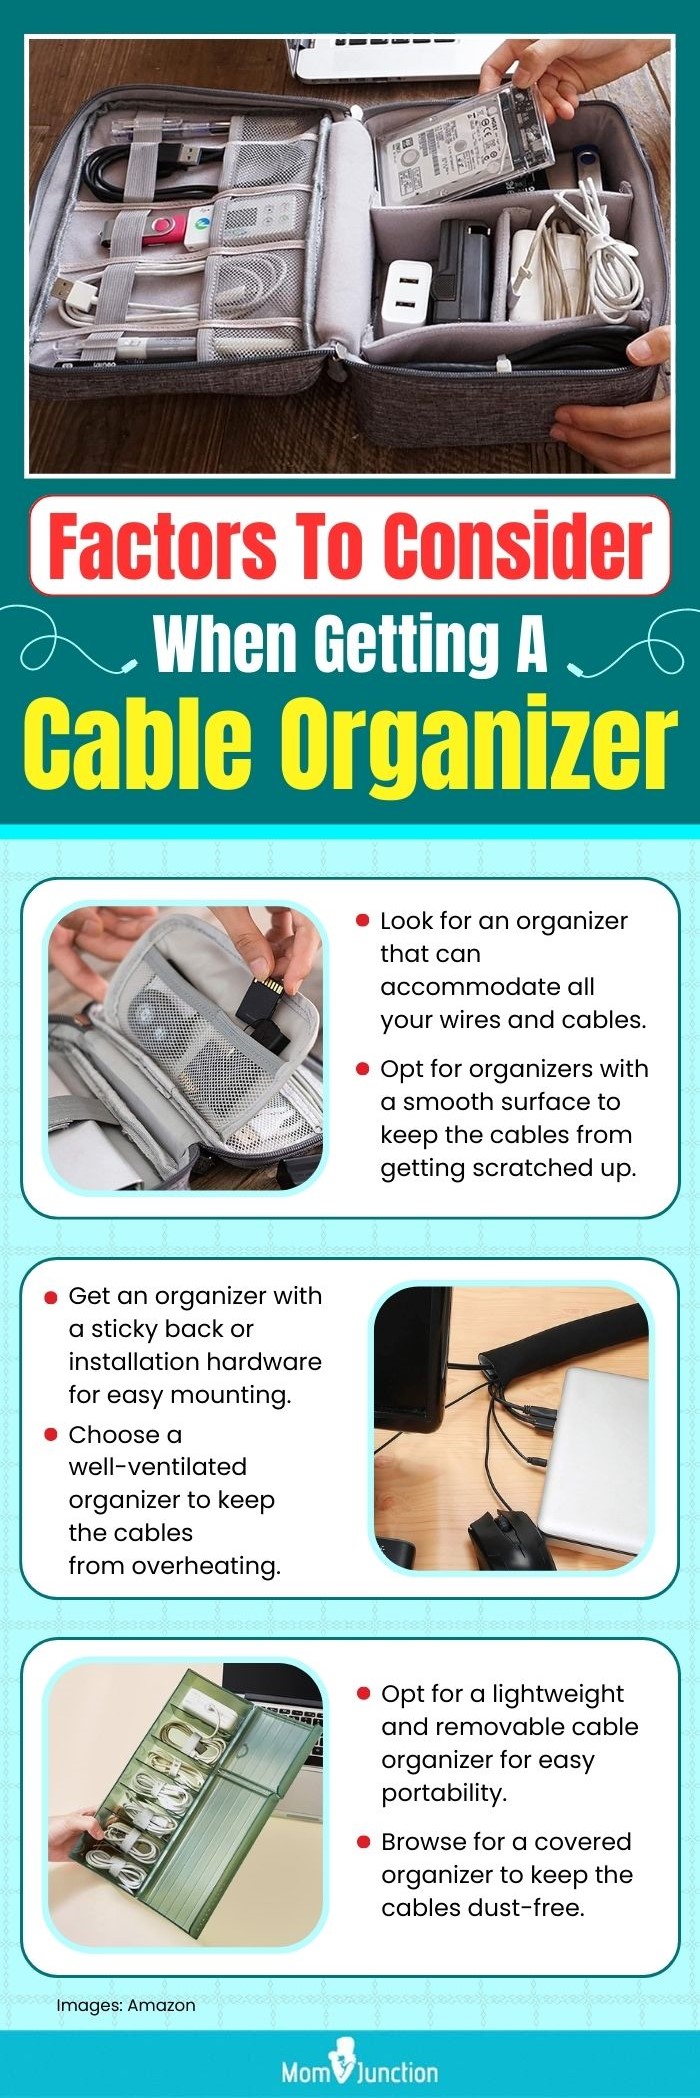 Under Desk Cable Organizer Cord Cover - Channel to Hide Power Strips,  Wires, Power Supplies, Surge Protectors at Home or Office - SimpleCord